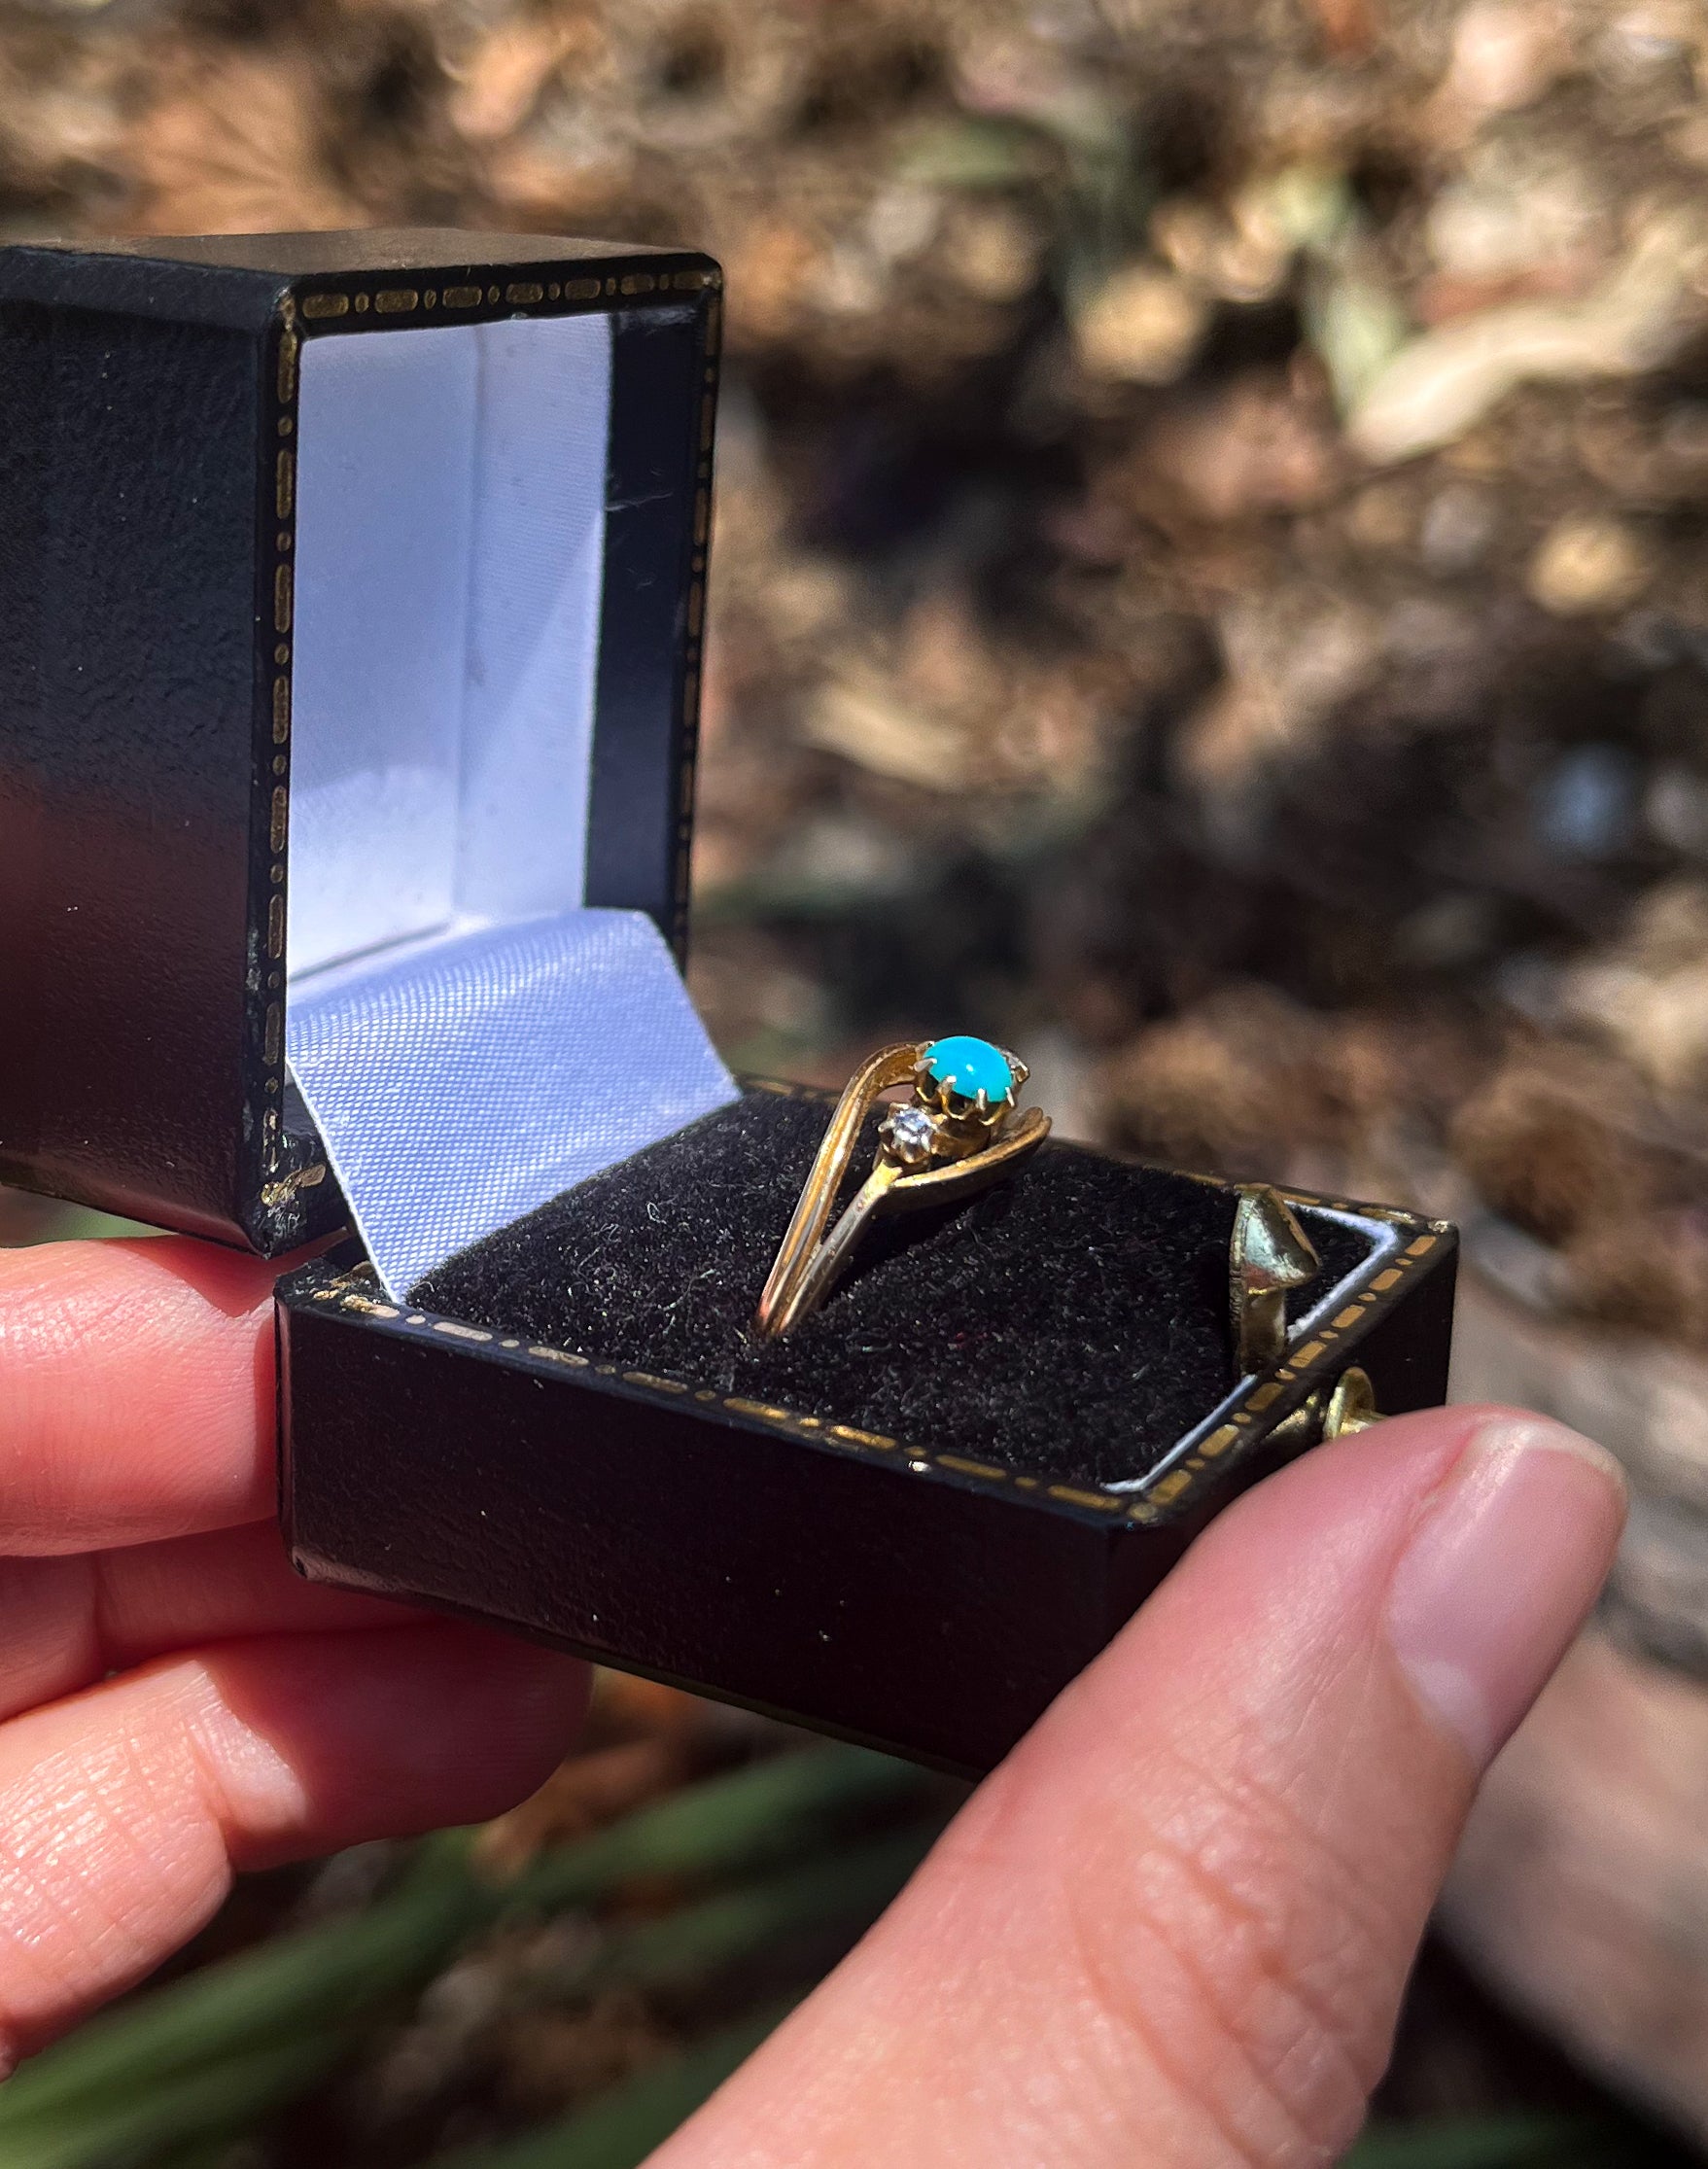 Antique Victorian Turquoise & Diamonds 18k Gold Ring (UK 1880s) US size 6 (Art Nouveau style) with old mine cut diamonds, anniversary gift, engagement ring, wedding gift, graduation gift, unique gift